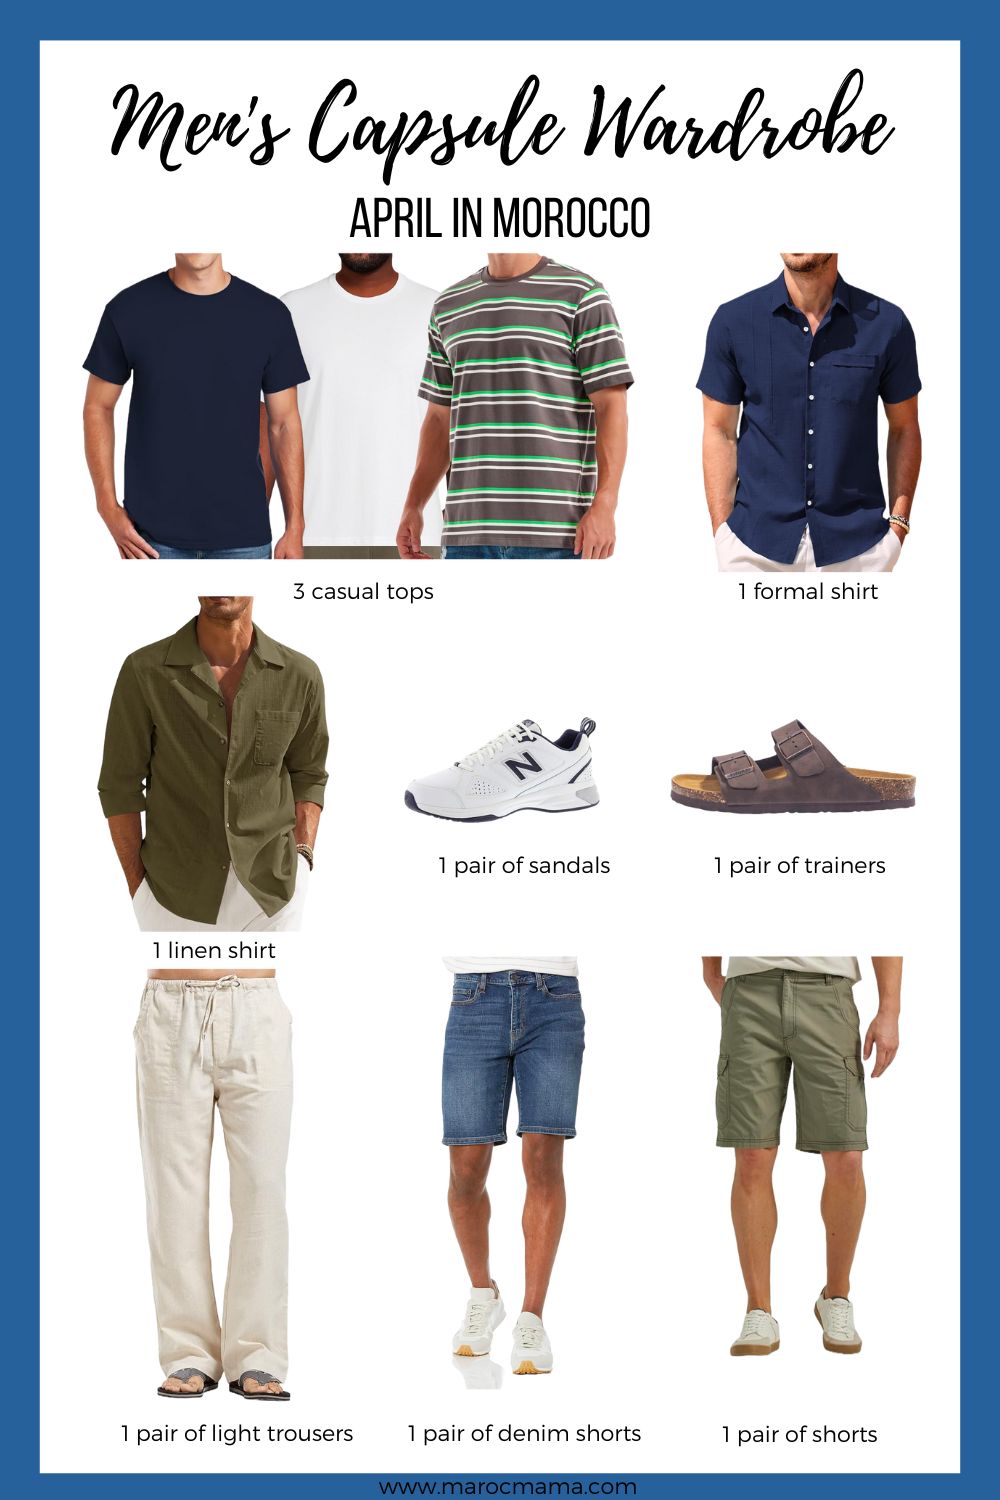 3 casual t-shirts 1 formal top 1 pair of light trousers 2 other bottoms (skirts/shorts) 1 linen shirt/sun cover to shade you from the sun 1 pair of trainers 1 pair of sandals with the text Men's Capsule Wardrobe, April in Morocco